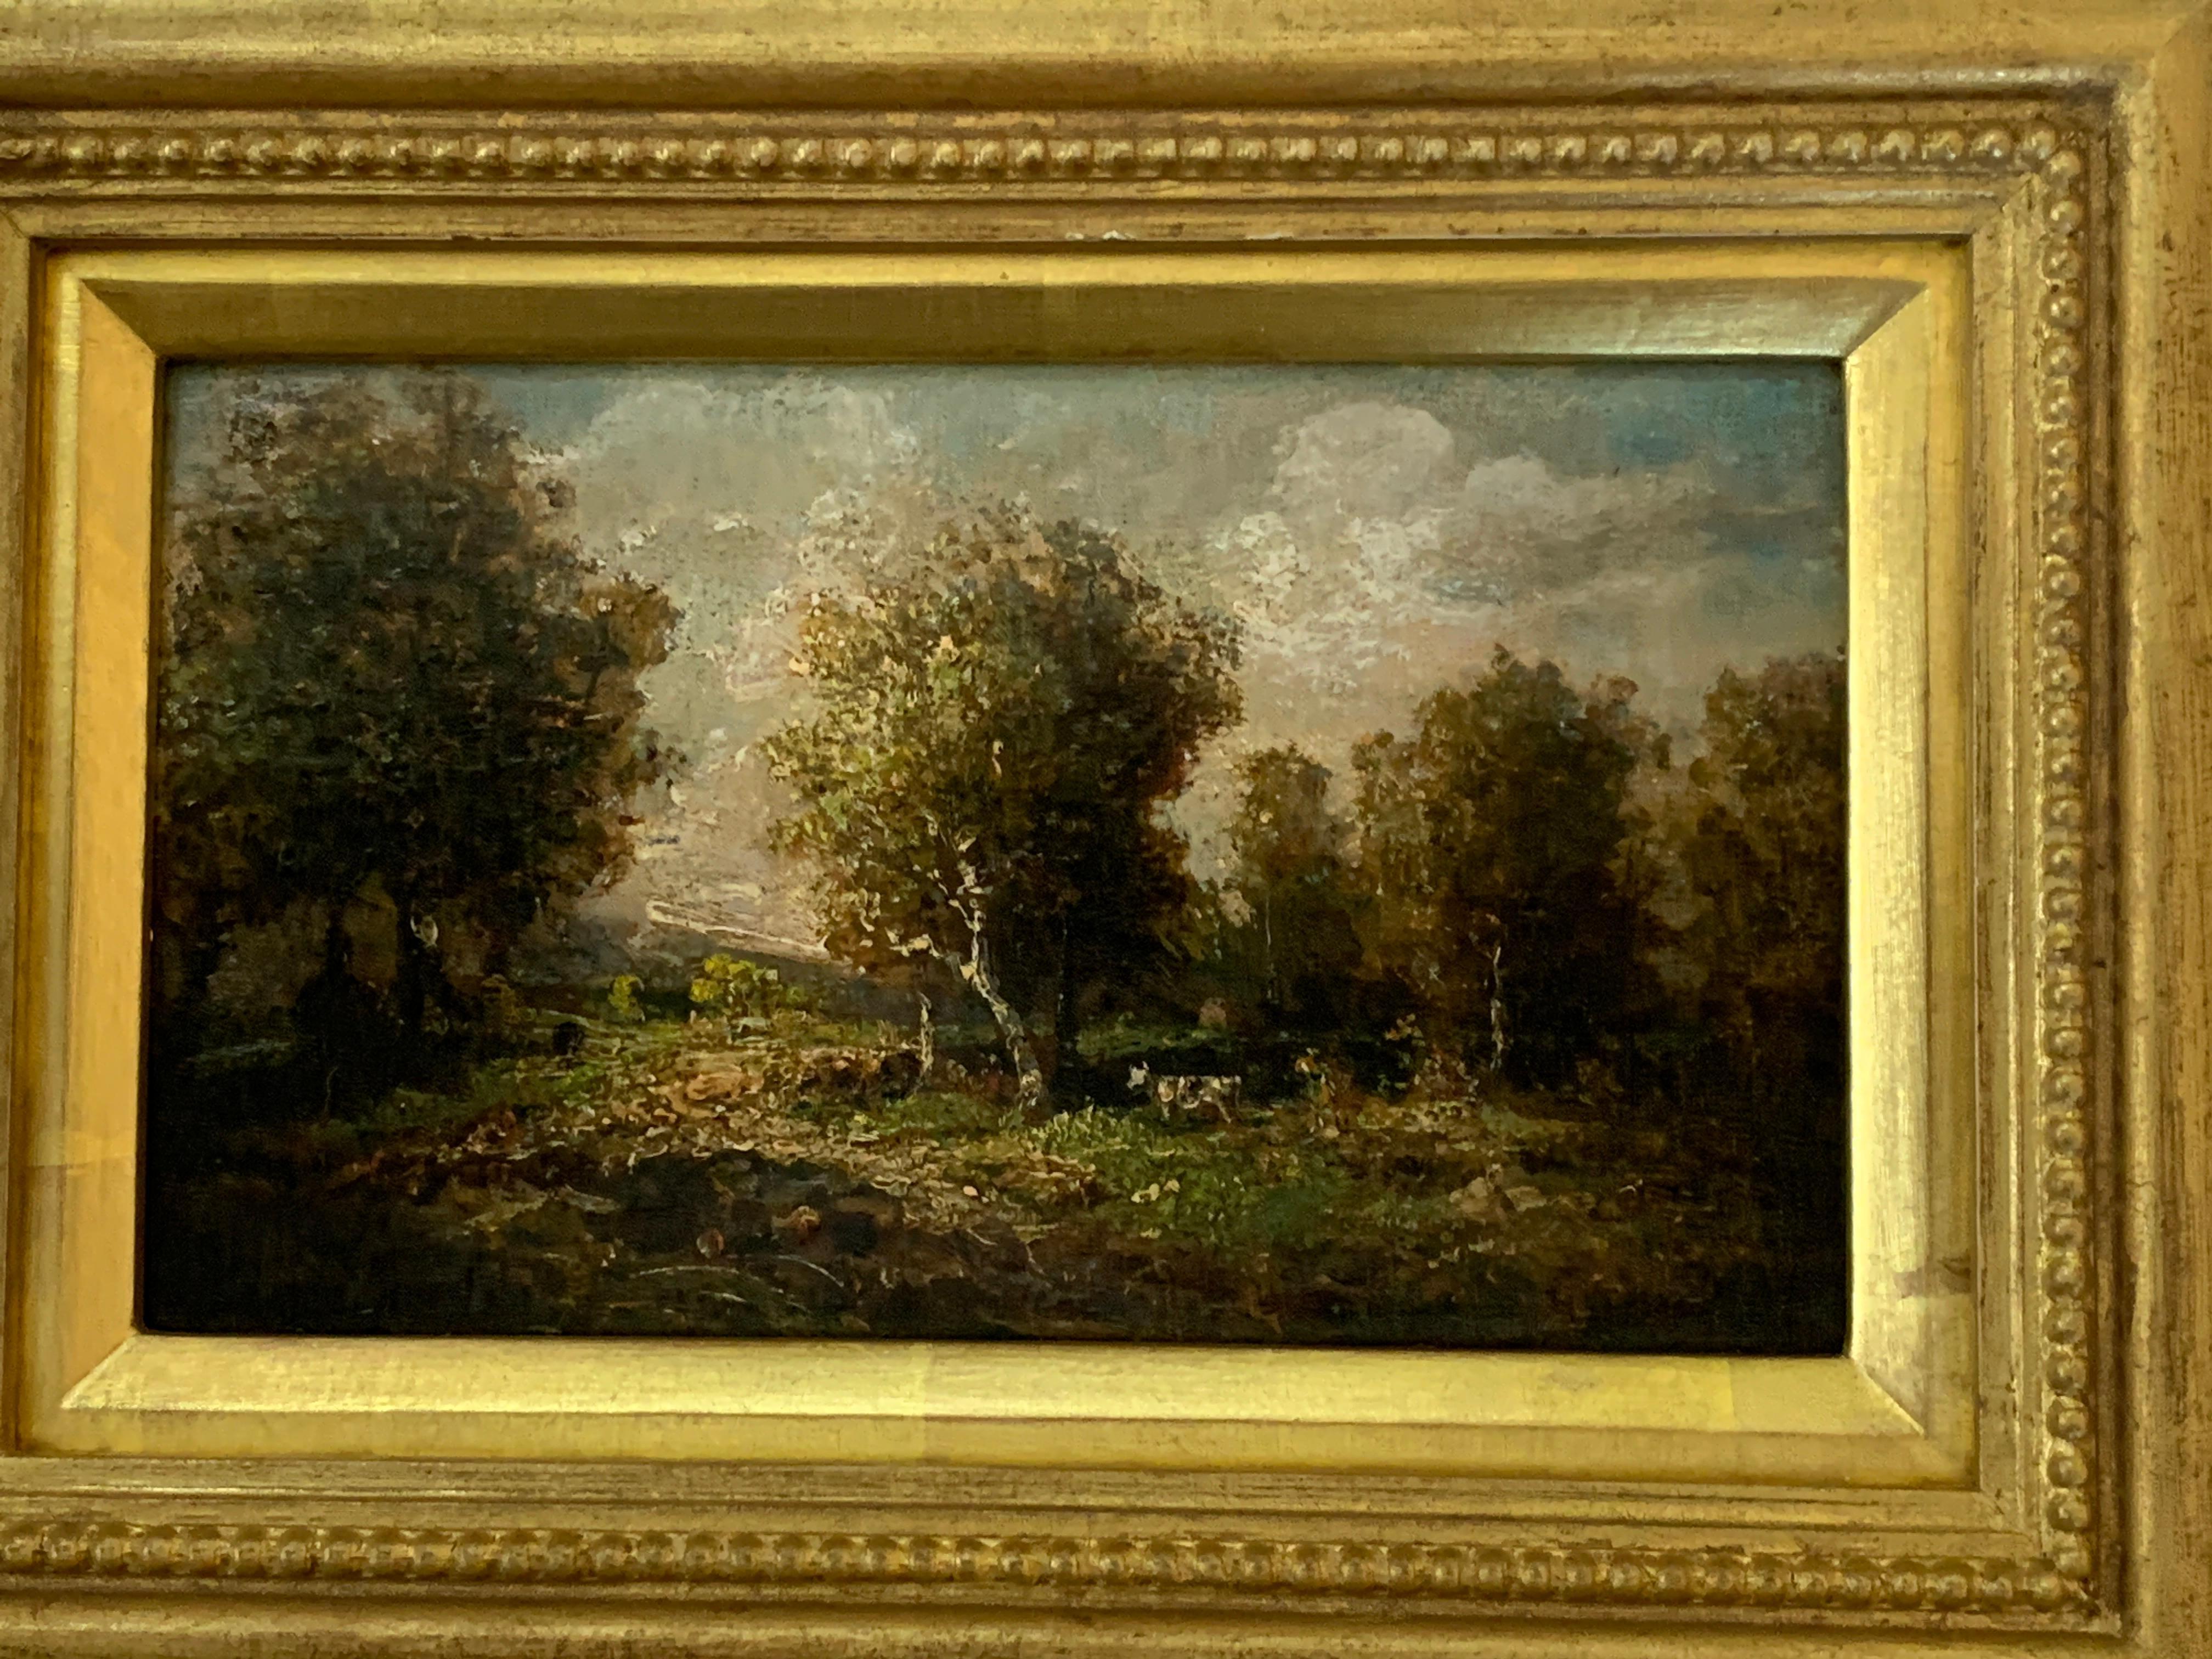 19th century French forest landscape near Barbizon and Fontainebleau - Painting by Attributed to Narcisse Virgilio Diaz de la Pena